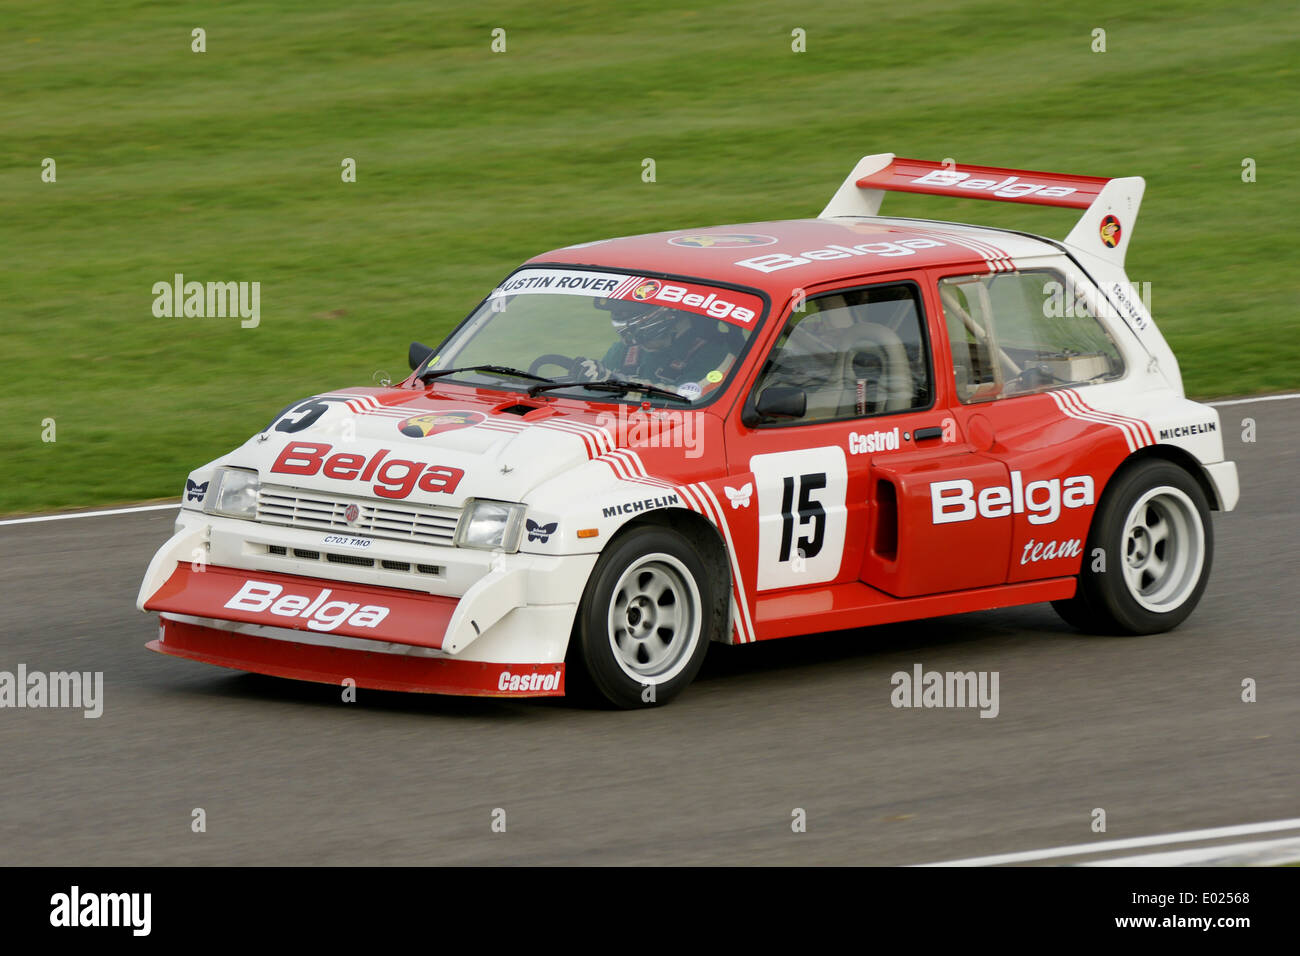 ARG MG Metro 6R4 Banque D'Images